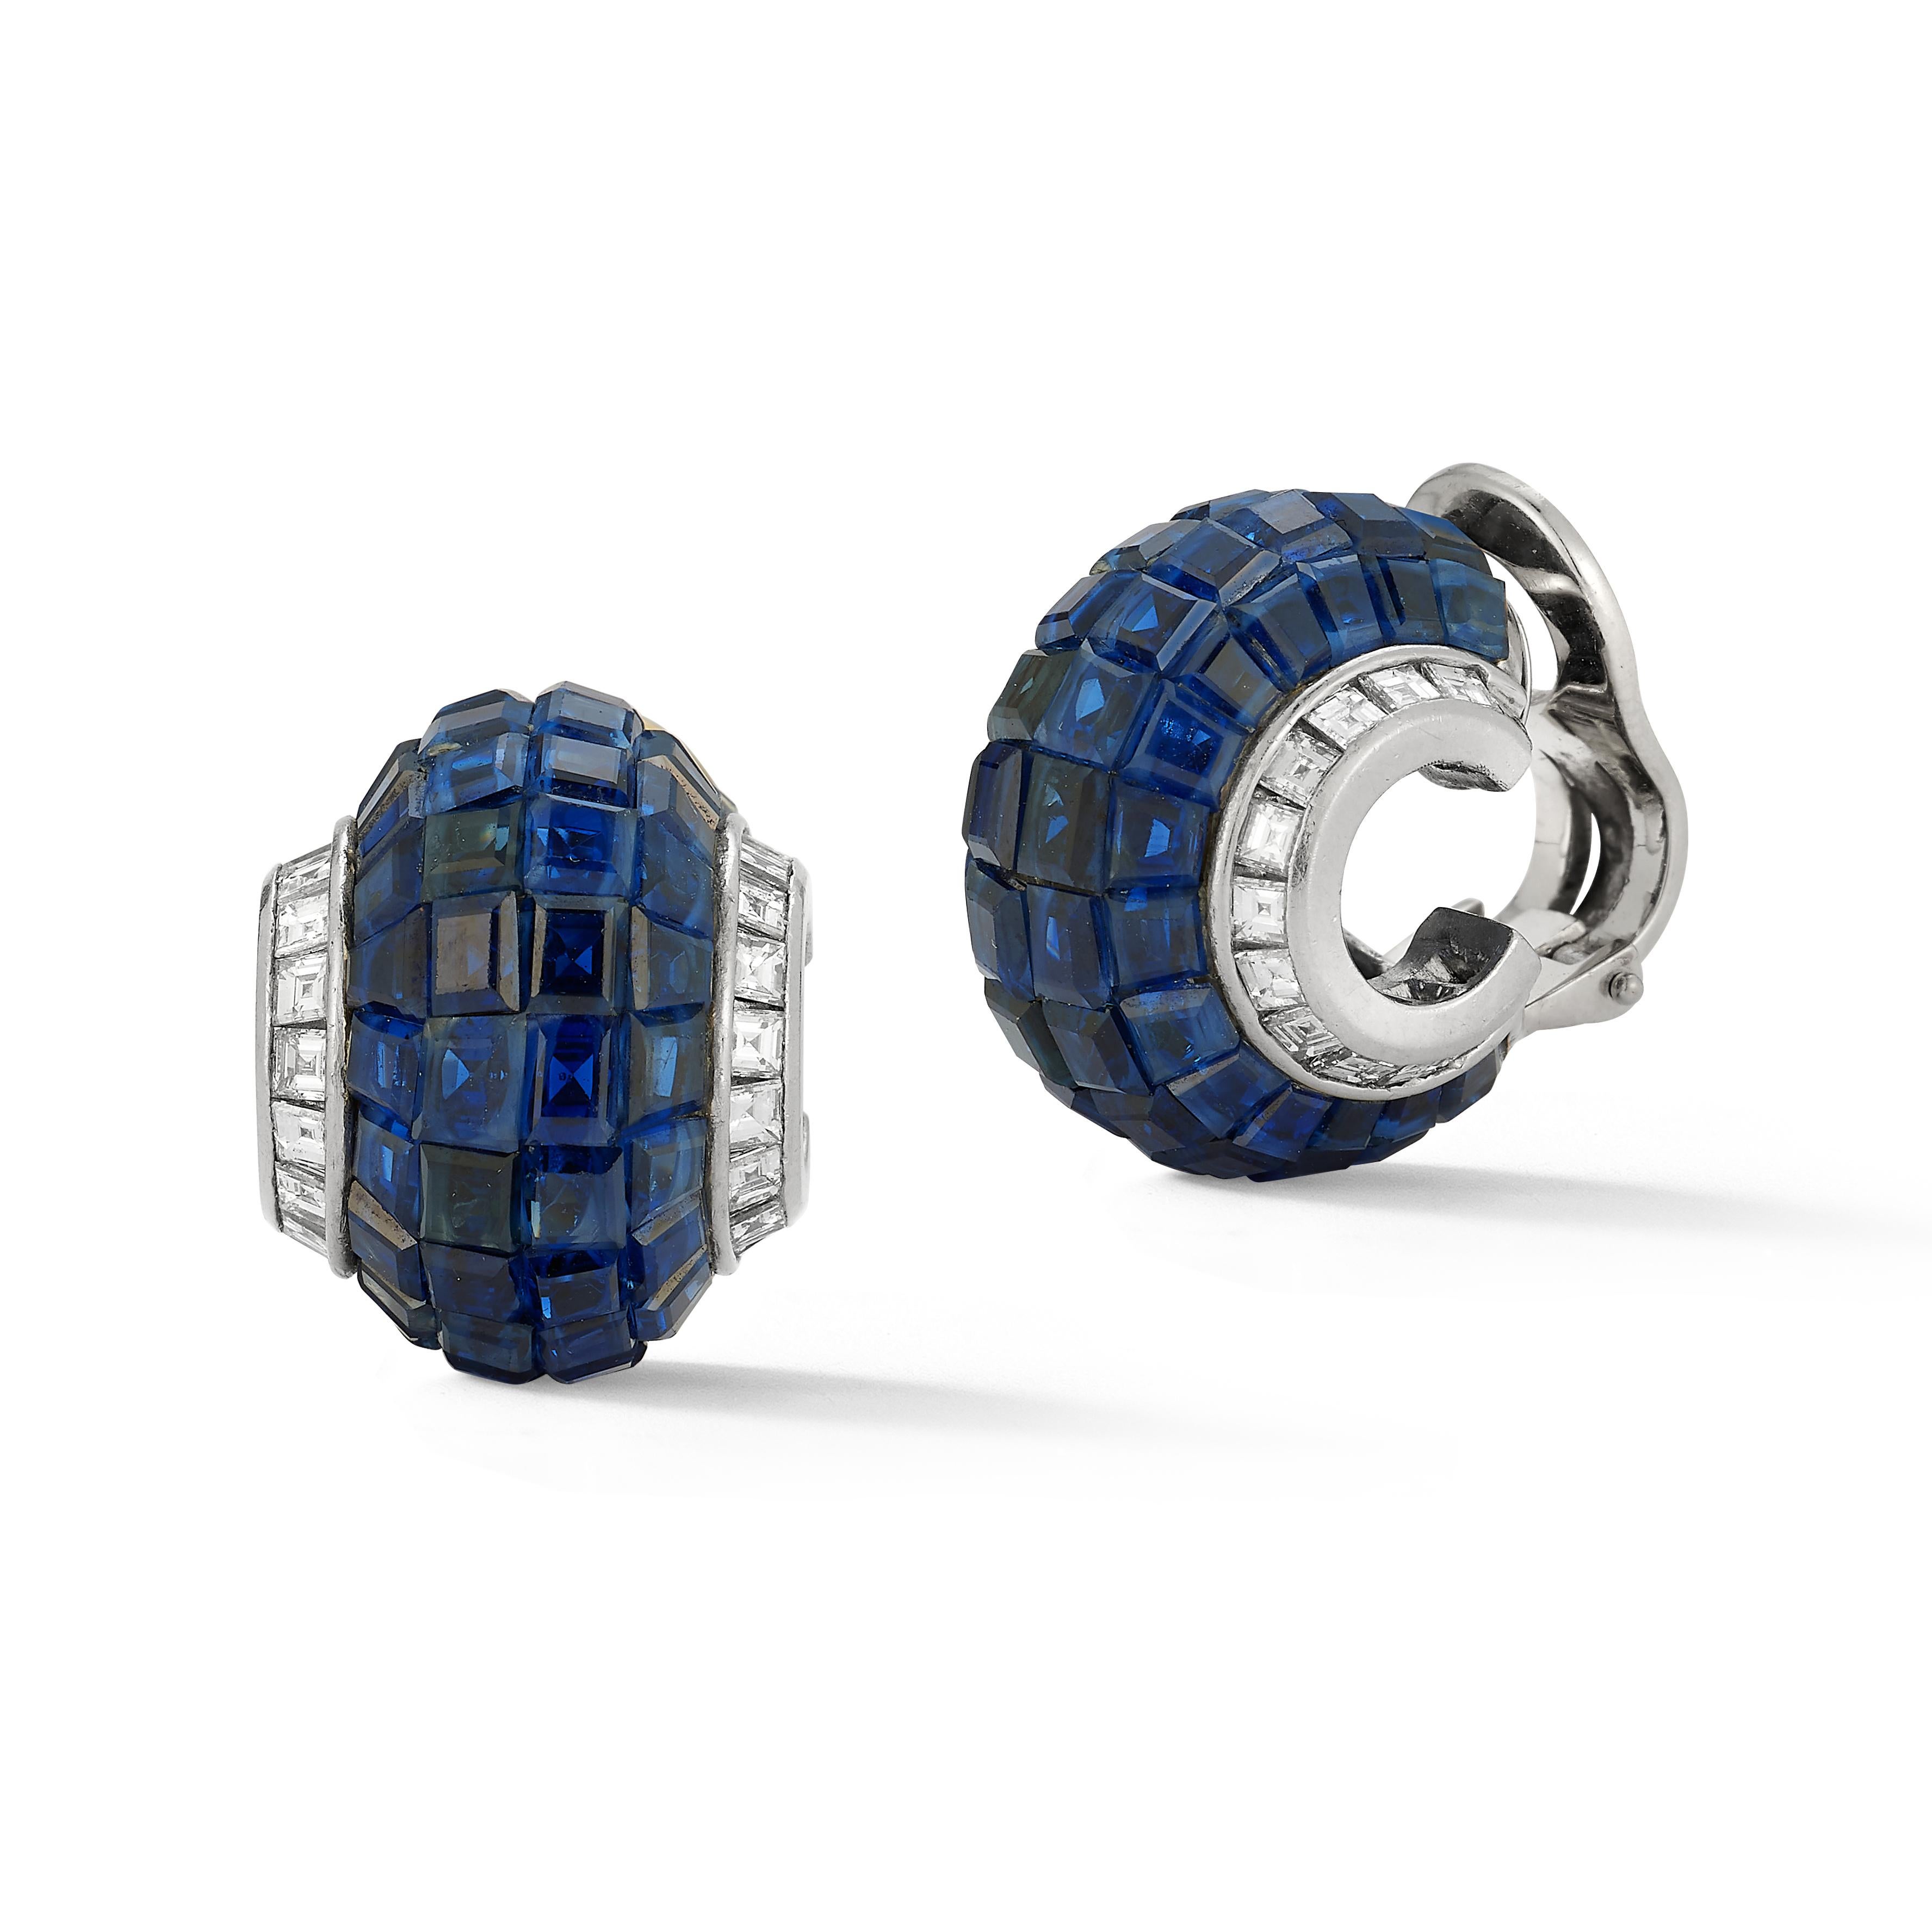 Oscar Heyman Brothers Invisible Set Sapphire & Diamond Earrings

A pair of earrings with 4 rows of square cut sapphires & 2 rows square cut diamonds set in platinum.

Sapphire Weight: 39.11 cts 
Diamond Weight: 1.72 cts 

Back Type: Clip